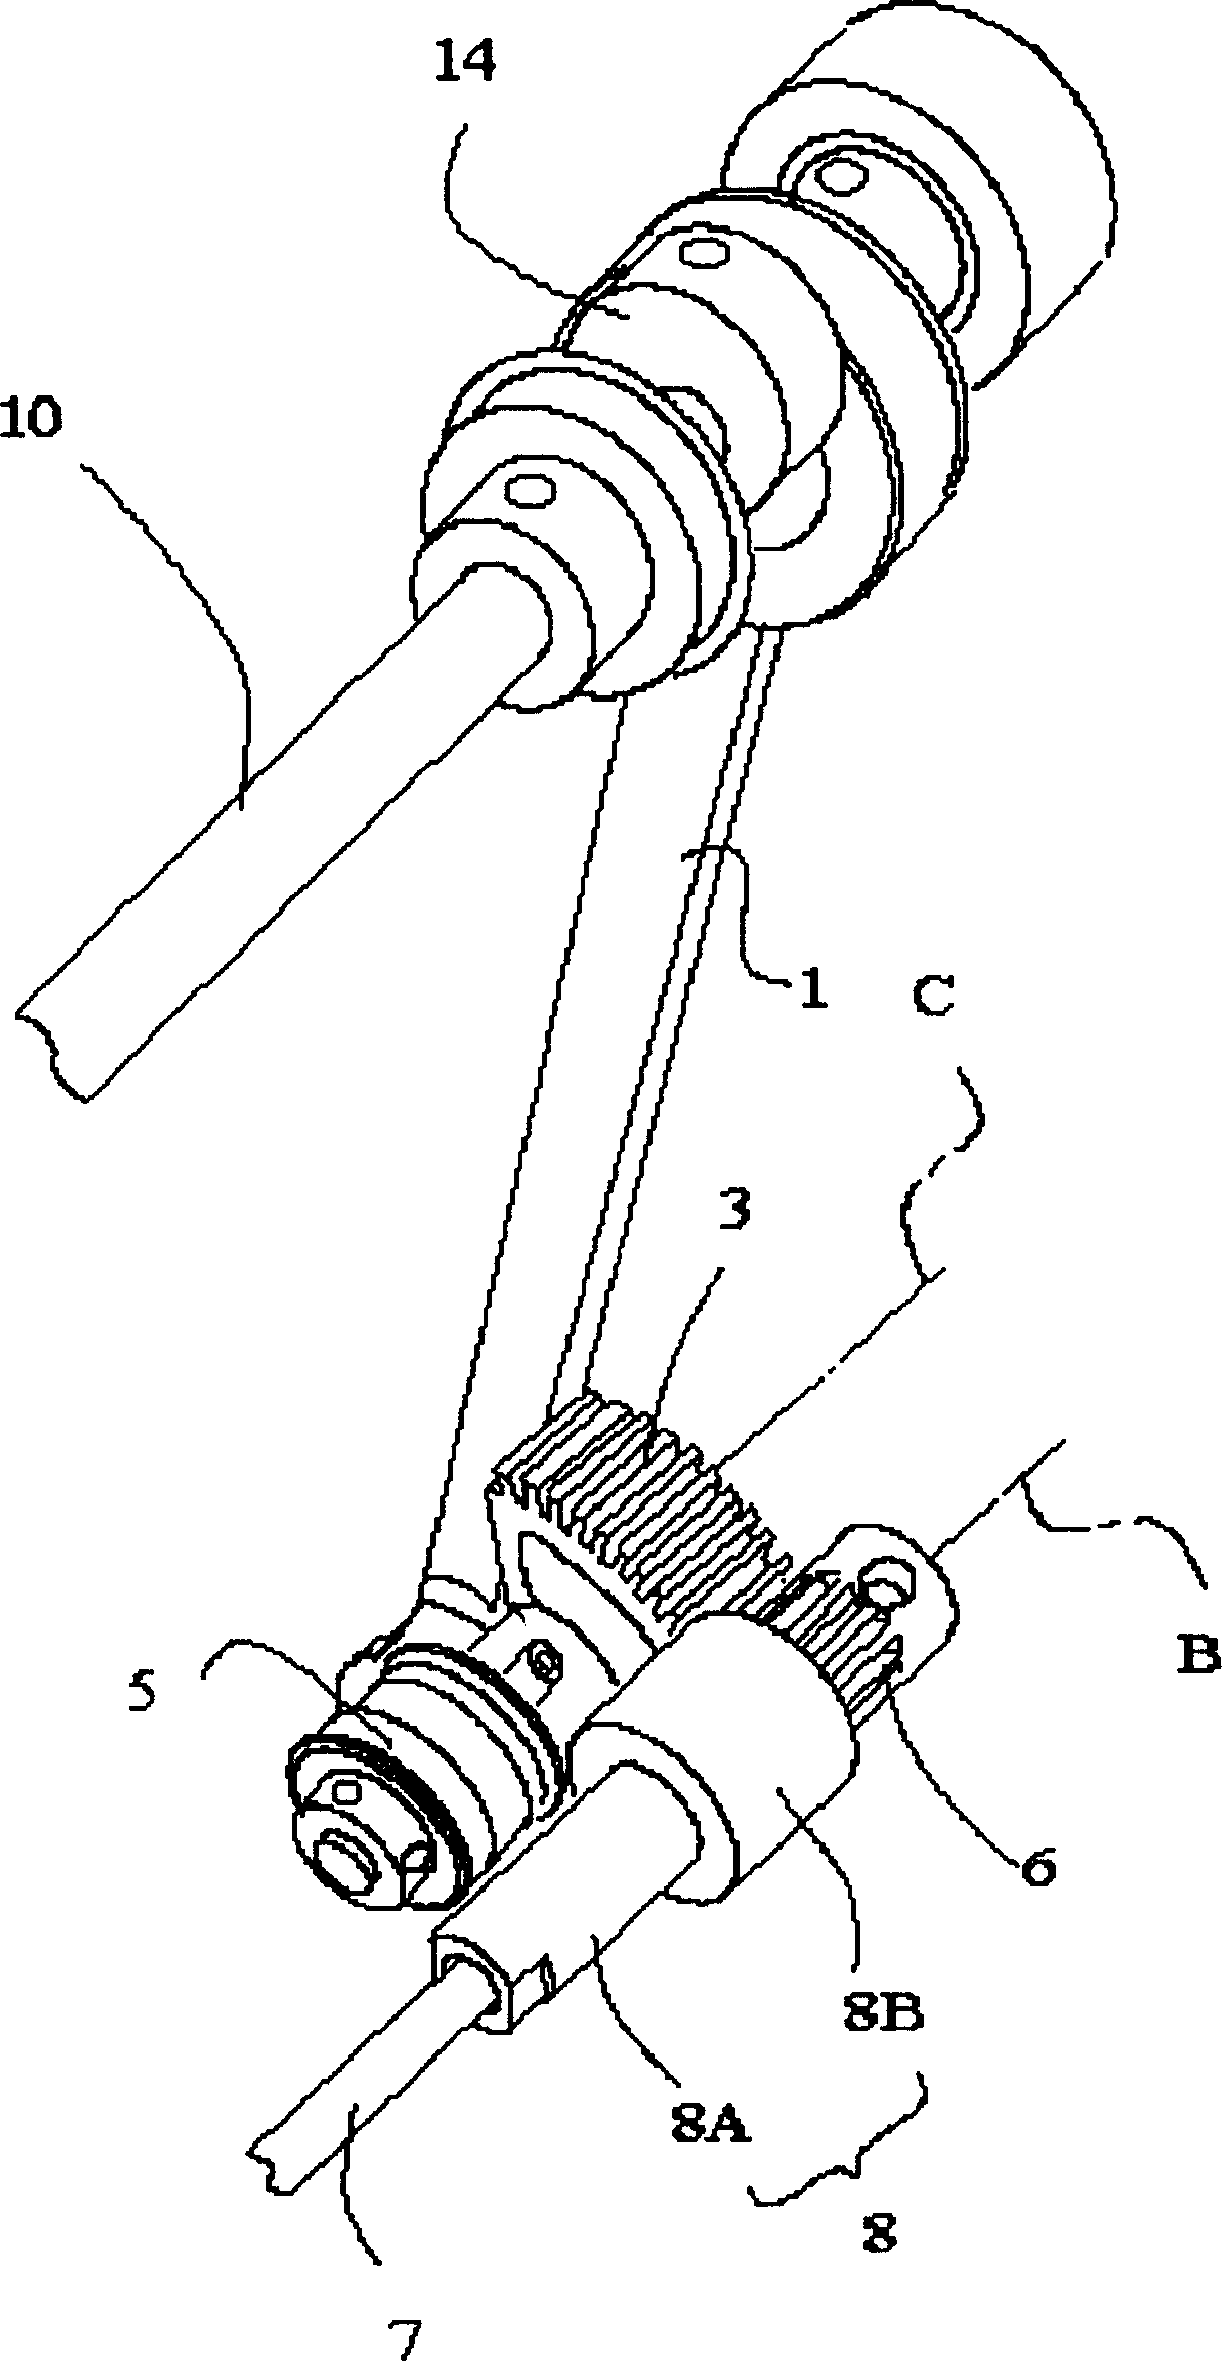 Lower shaft driving mechanism of sewing machine